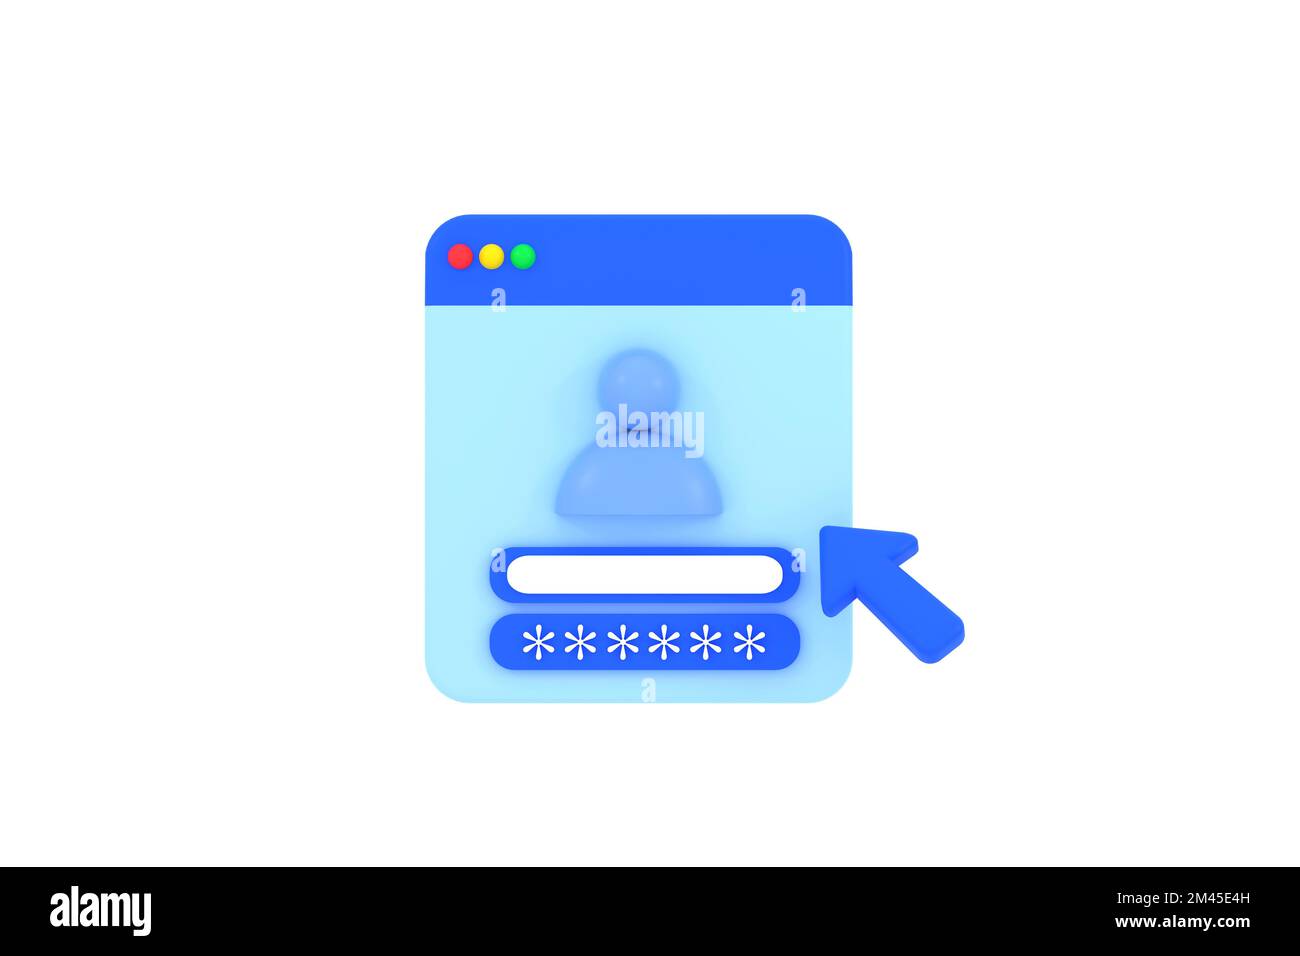 3D. Login screen of the operating system user. Stock Photo